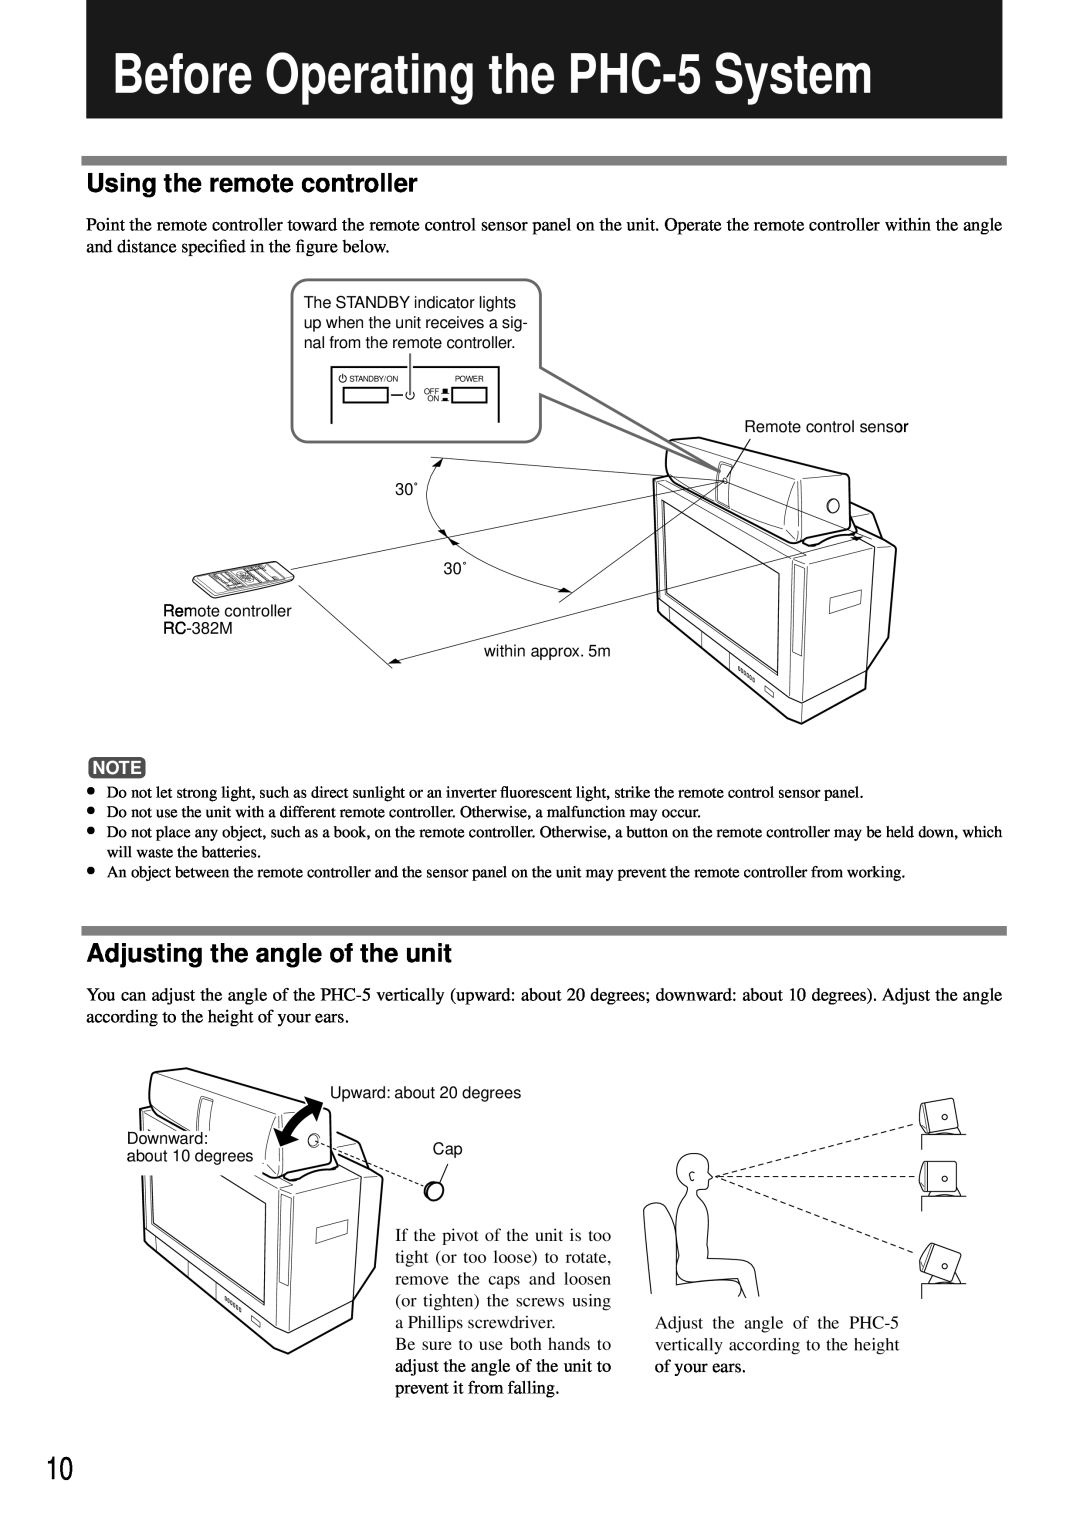 Onkyo instruction manual Before Operating the PHC-5System, Using the remote controller, Adjusting the angle of the unit 